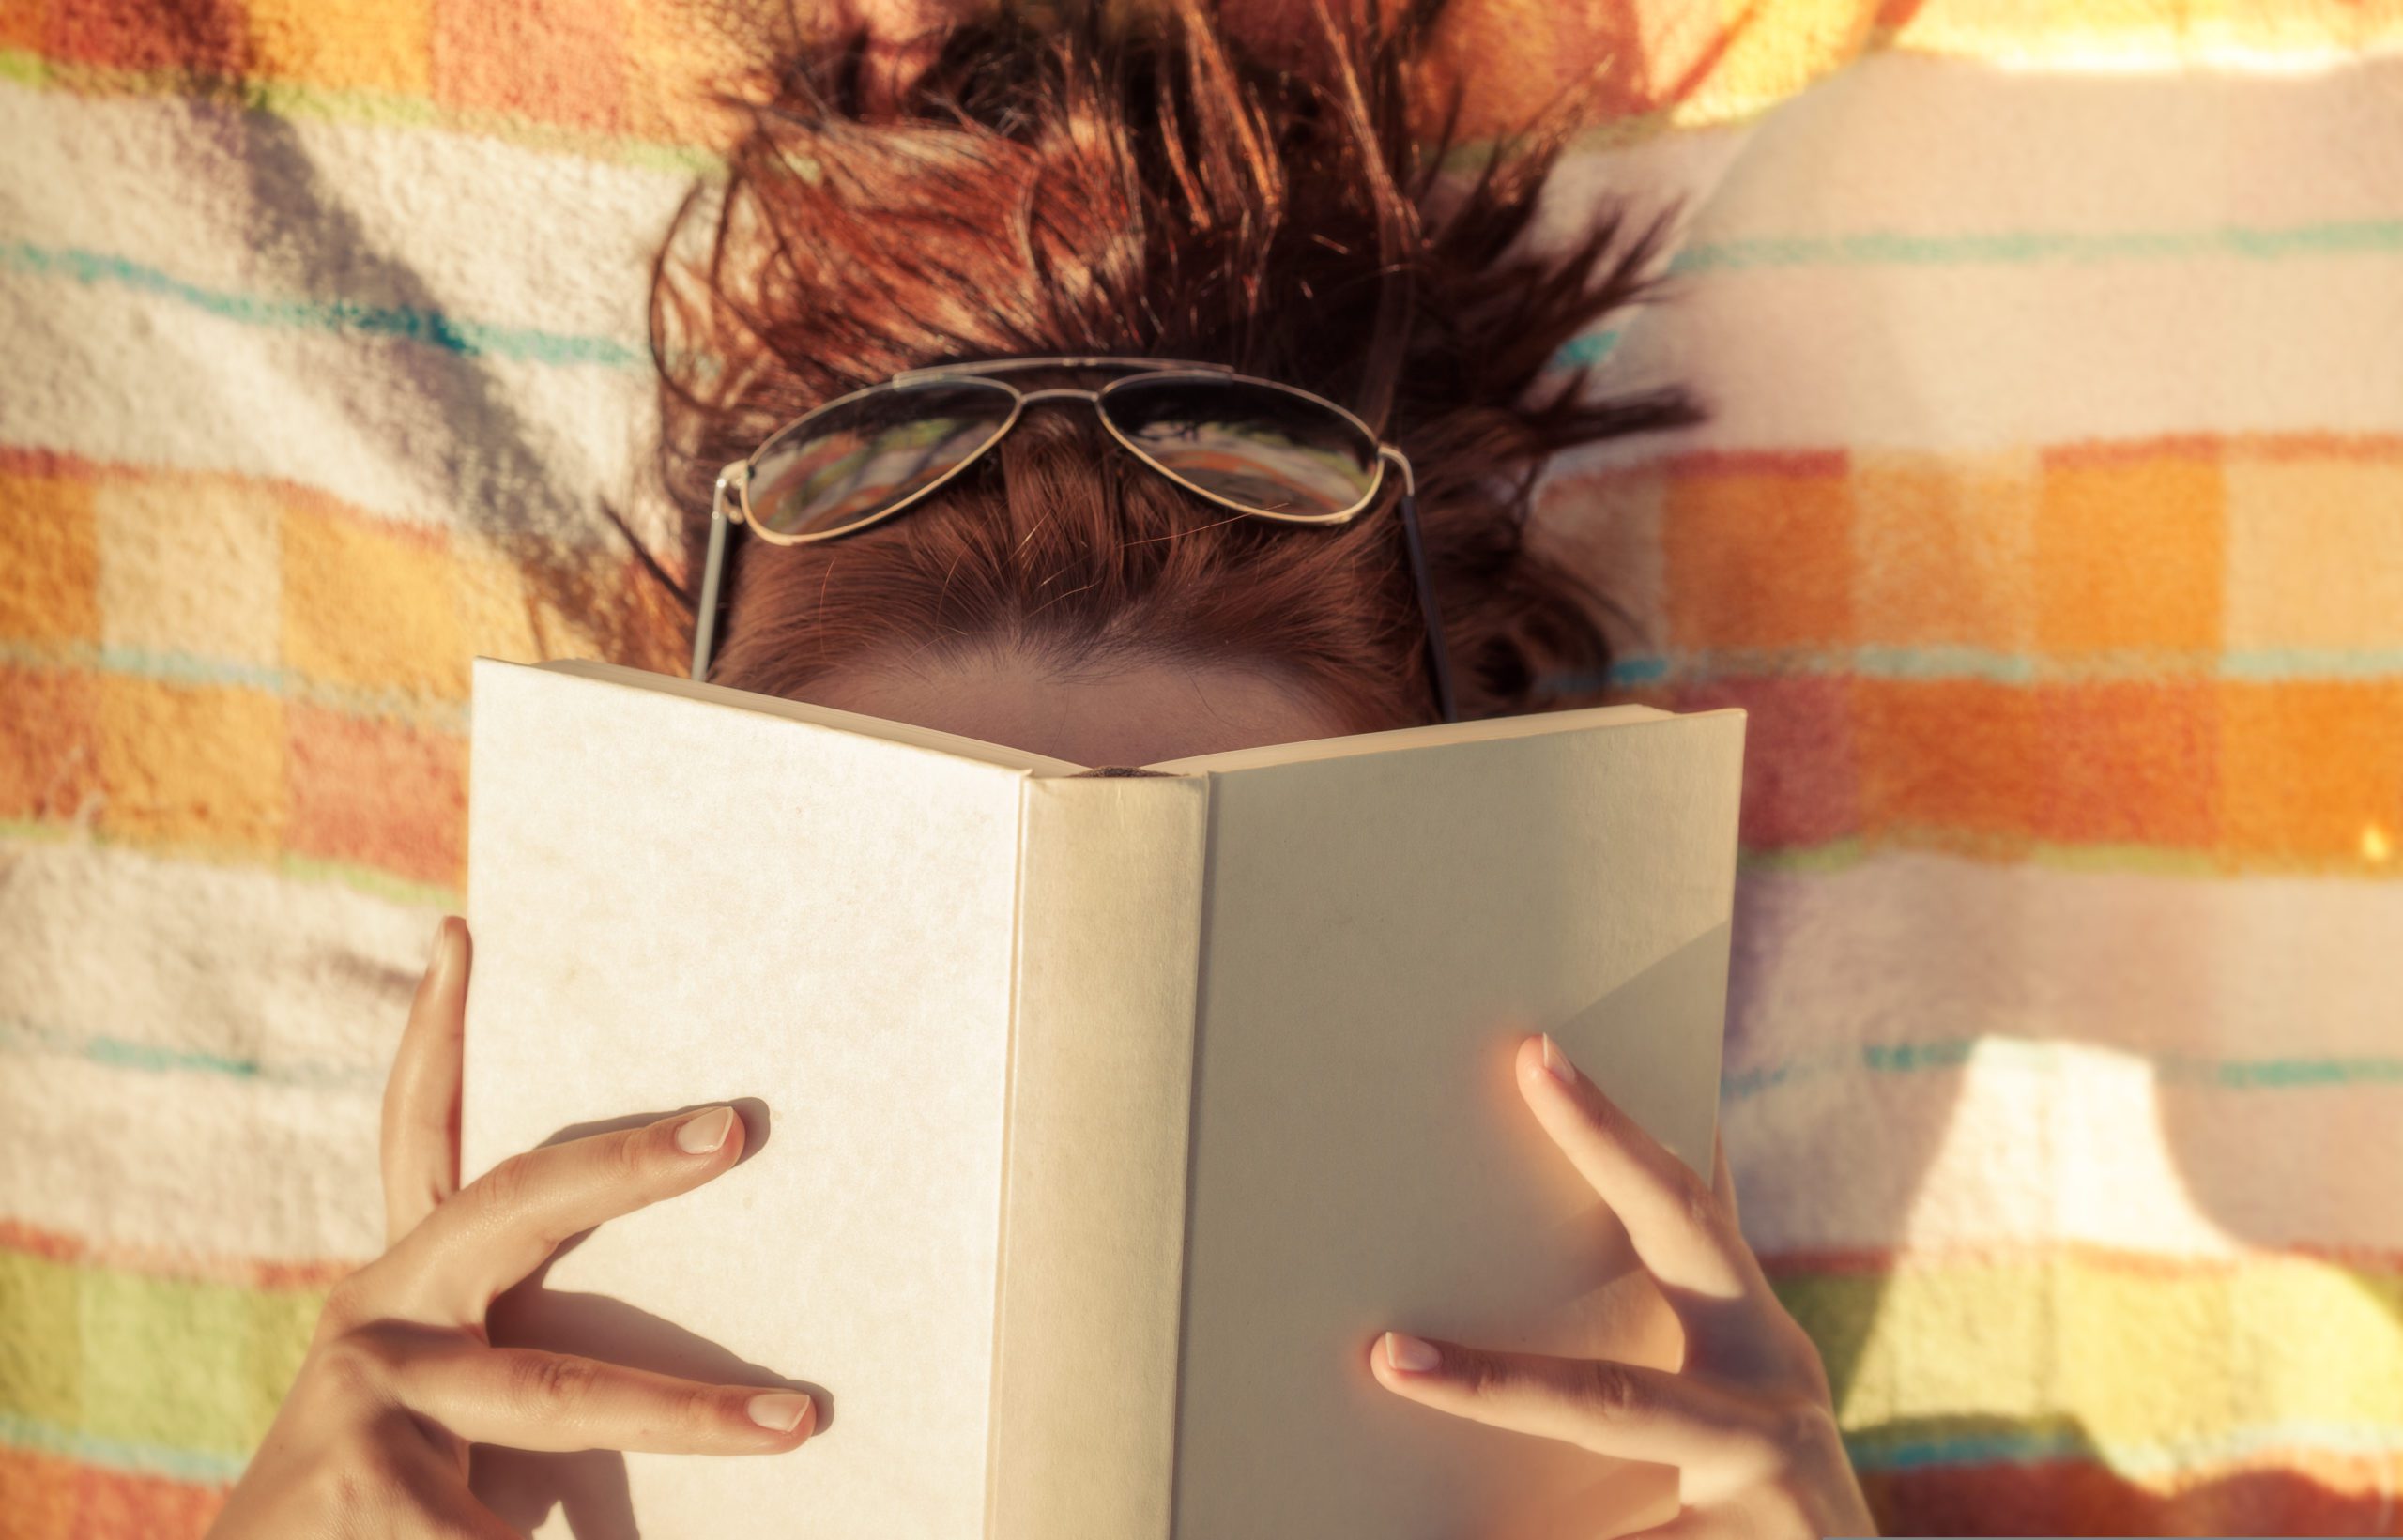 A woman lays holding a book over her head